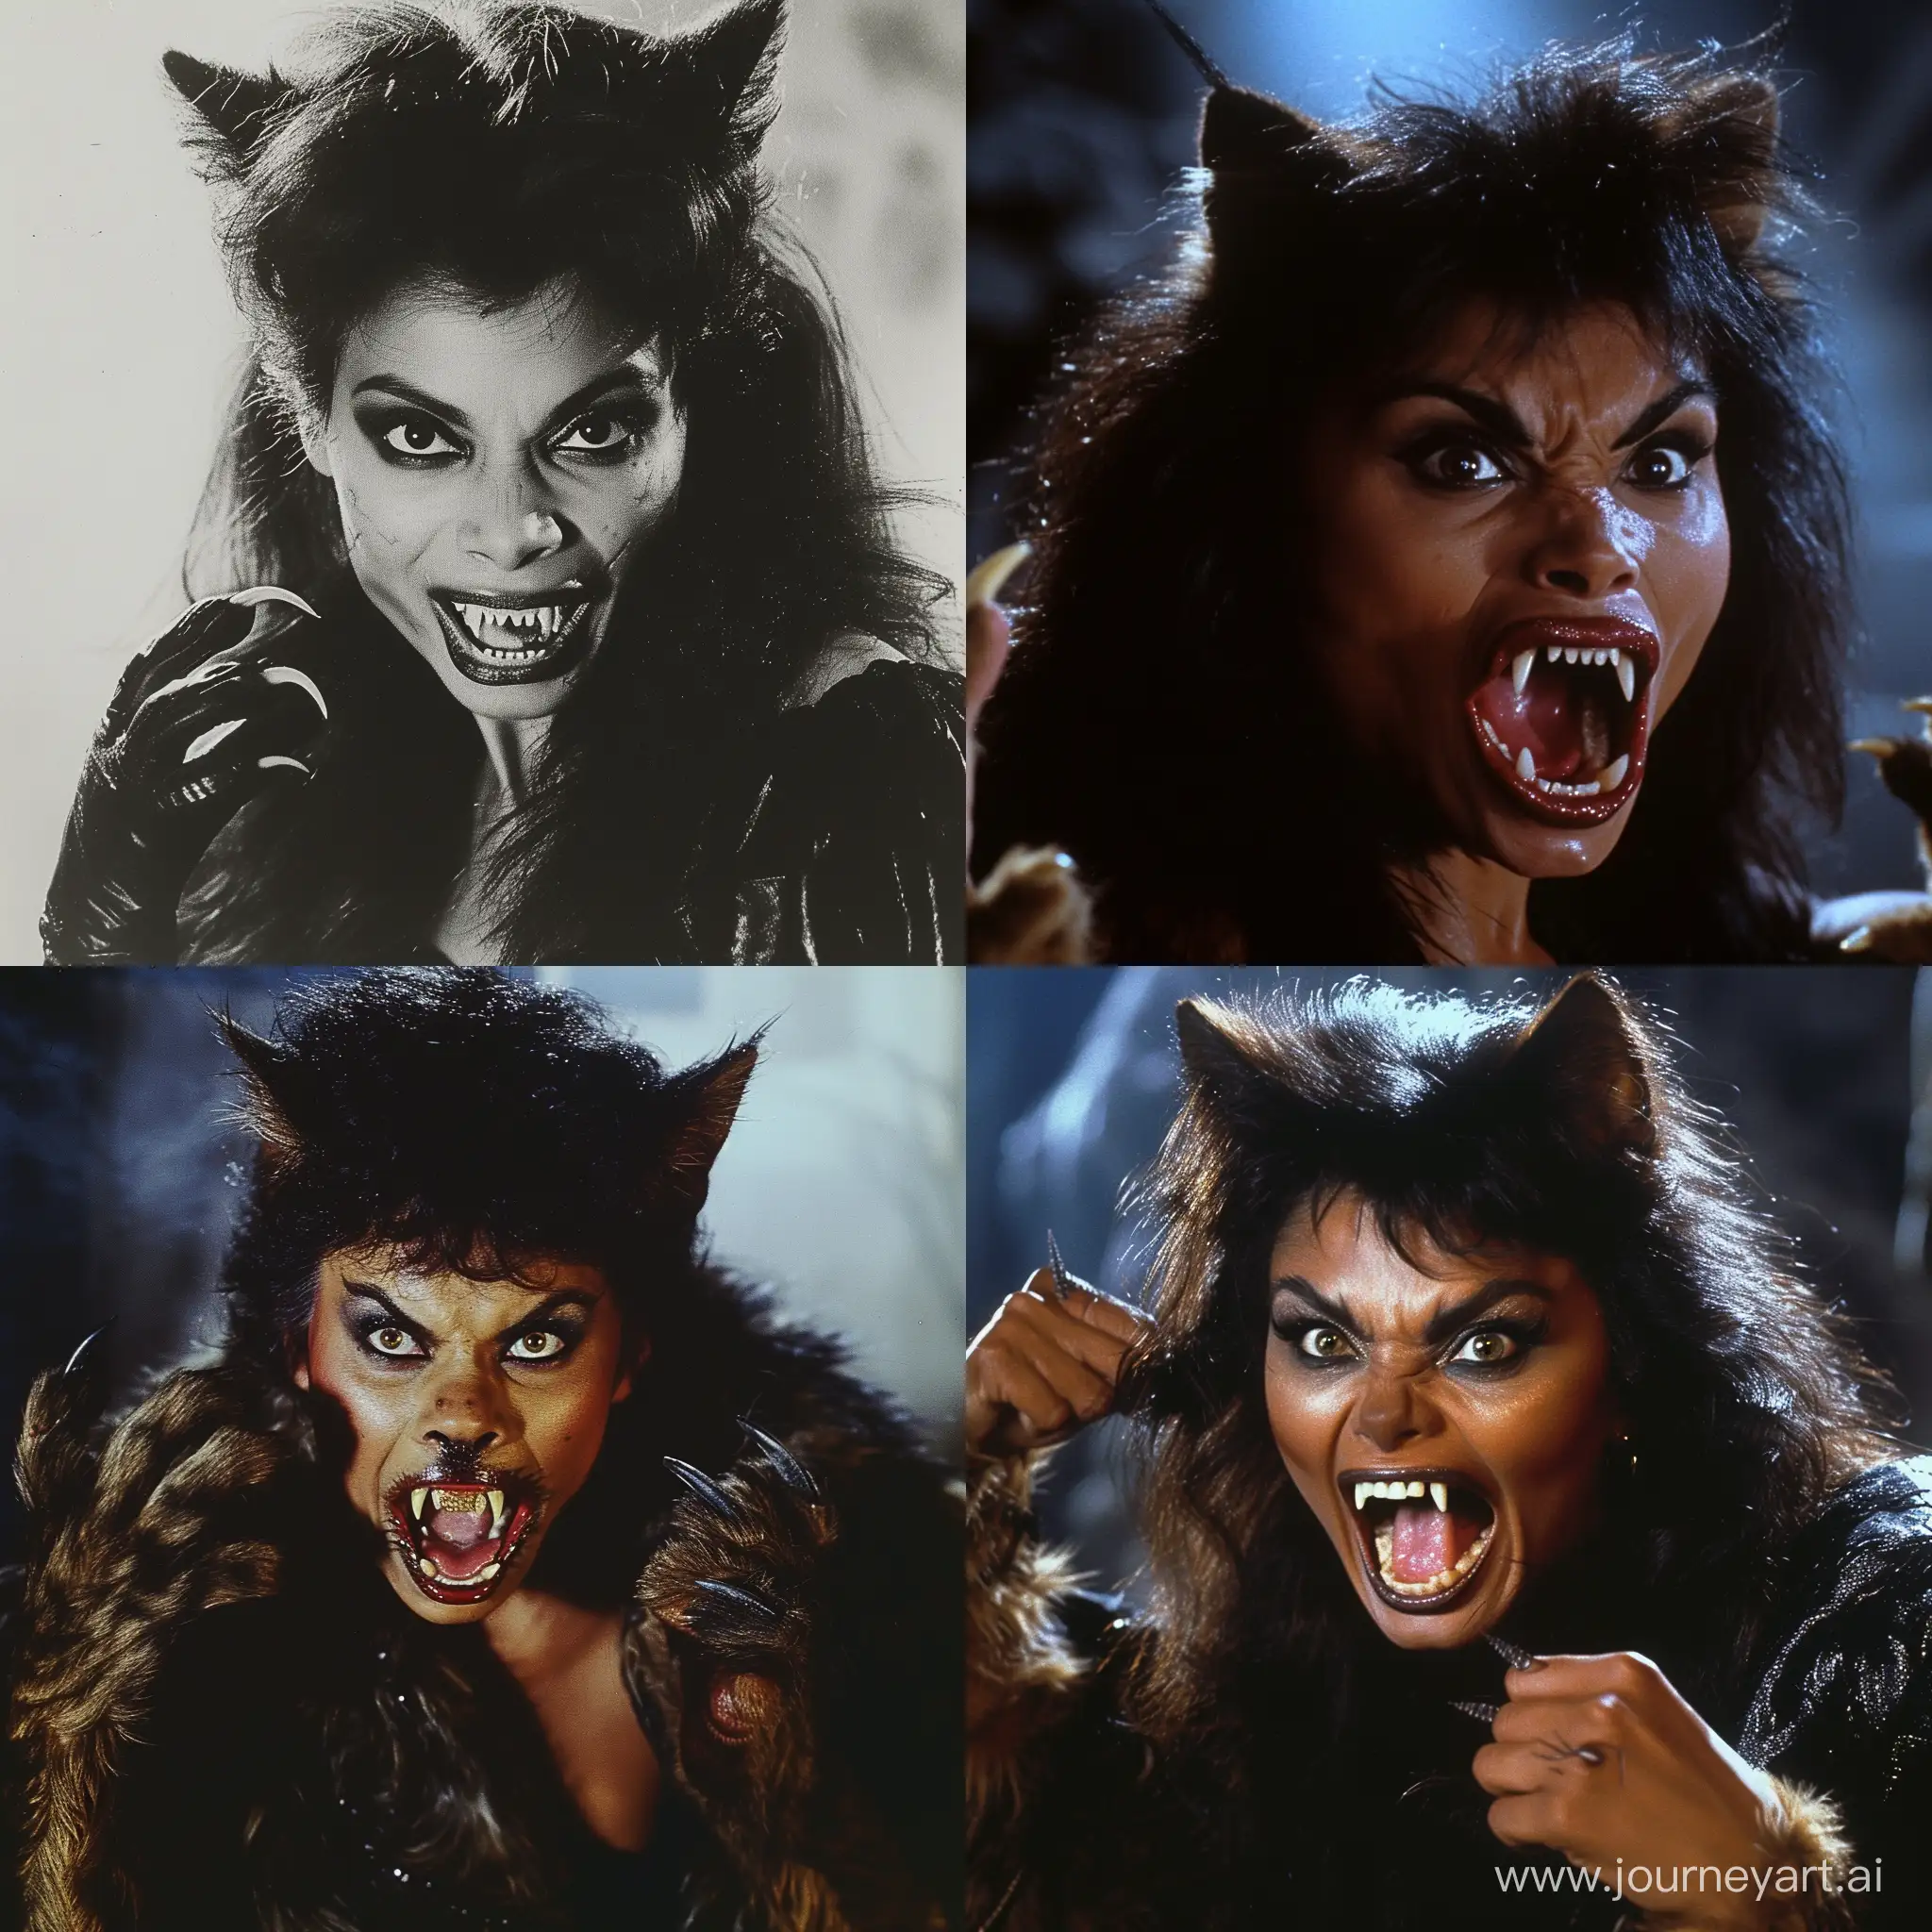 Paula Abdul in an 80s horror movie, turning into a werecat, fangs, cat-like features.